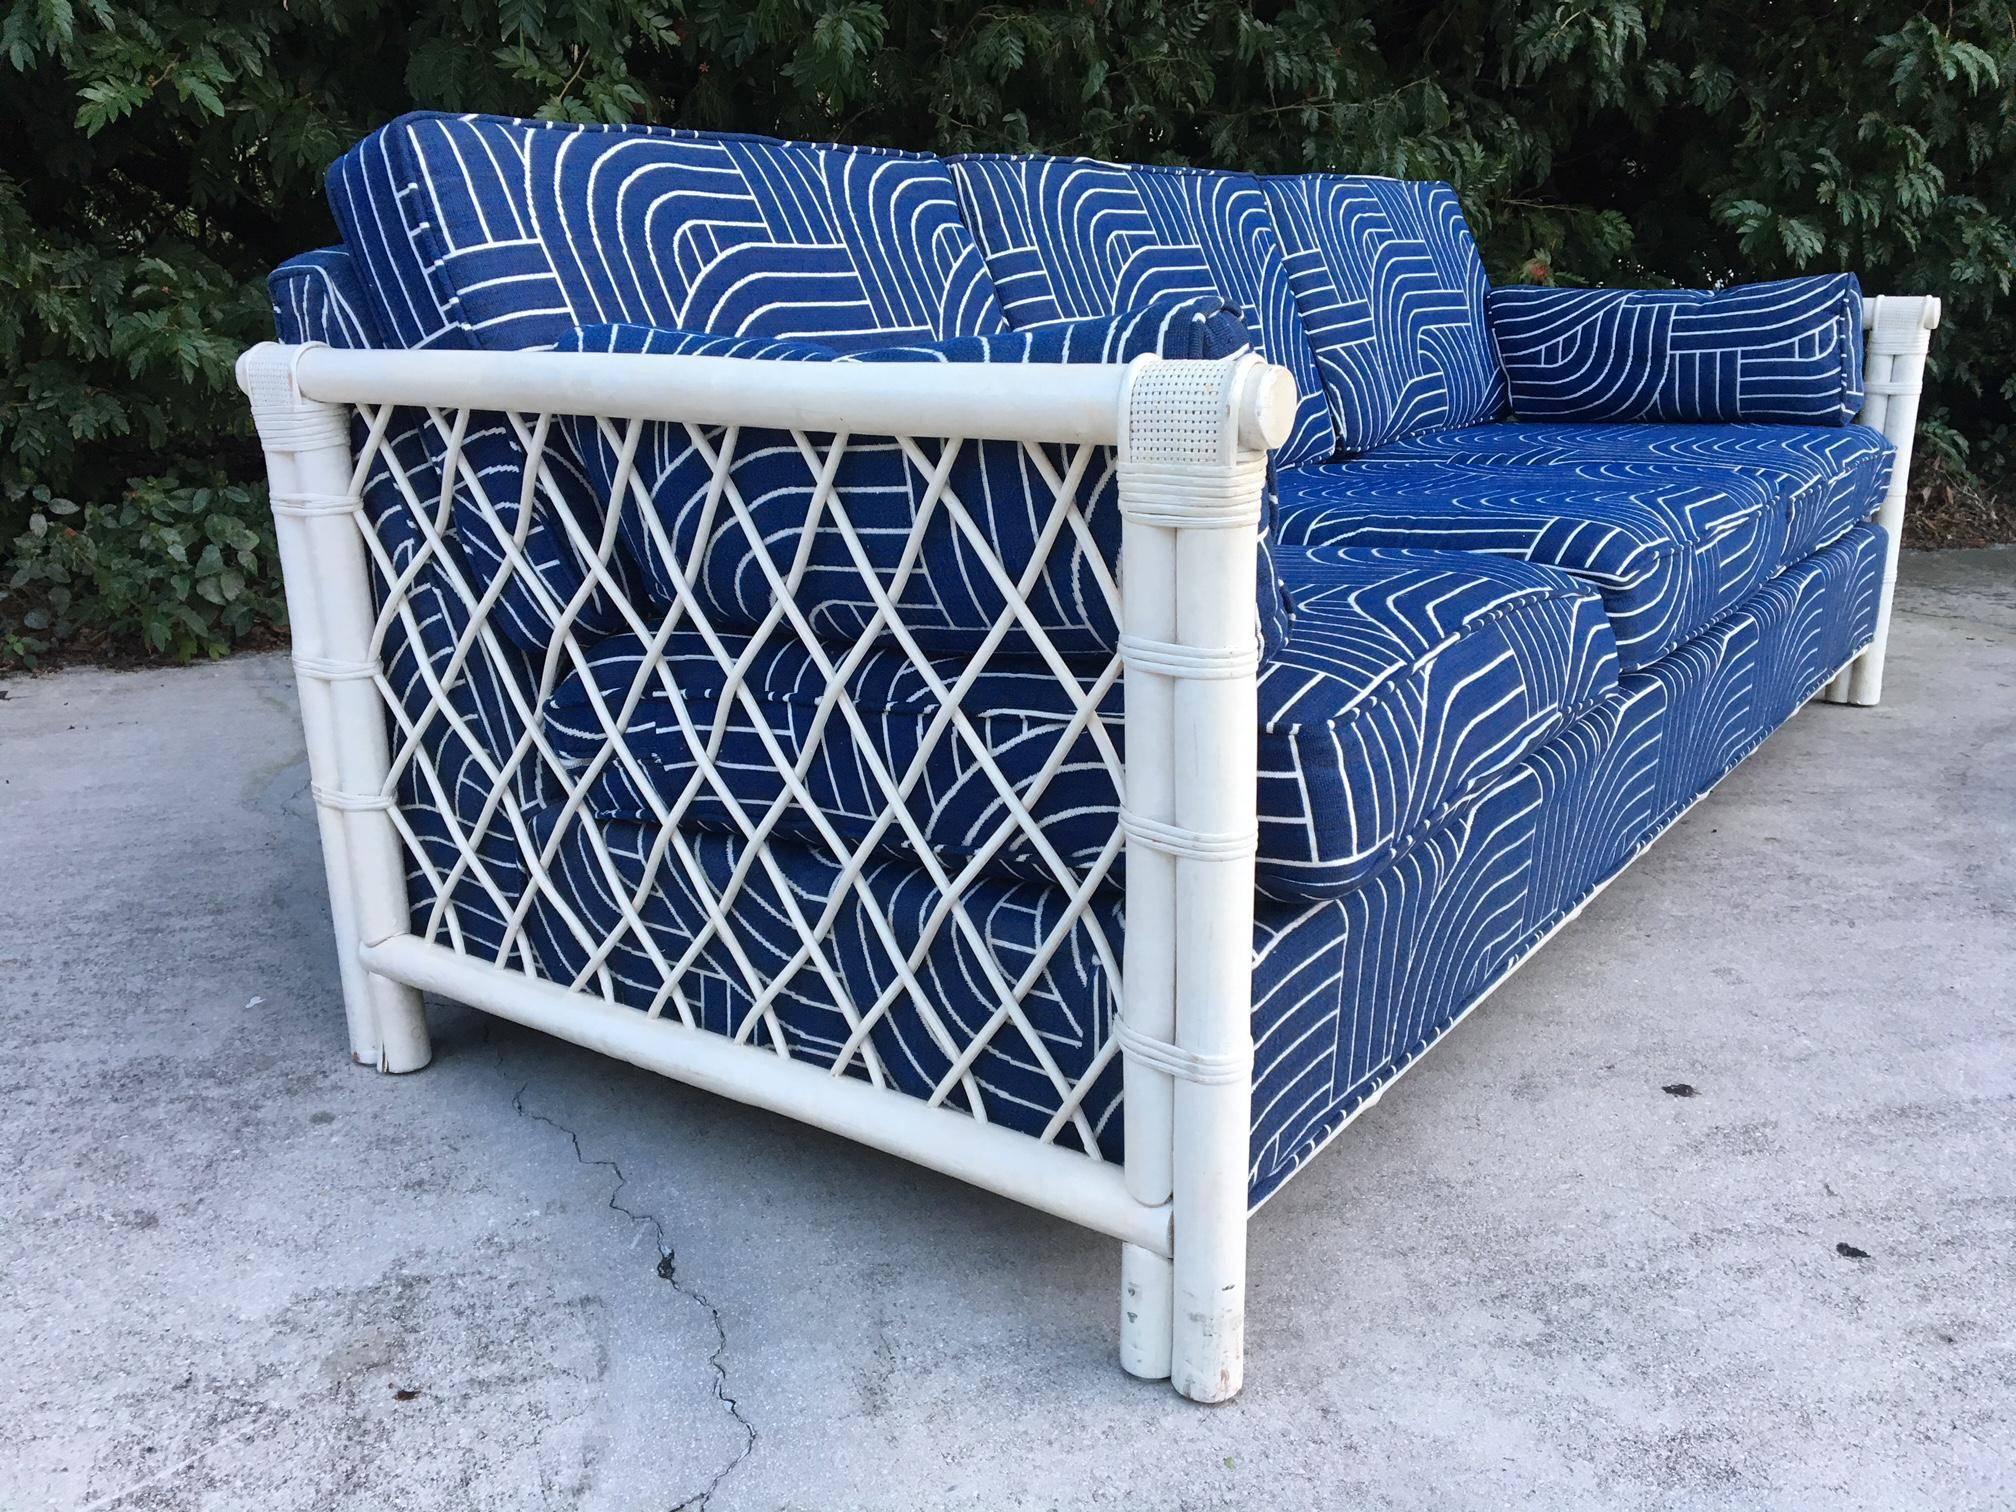 Beautiful rattan sofa features deep blue fabric with a modern print and woven rattan sides. Excellent condition with no stains or tears to fabric, and only very minor signs of age appropriate wear to frame.
Seat height is 17